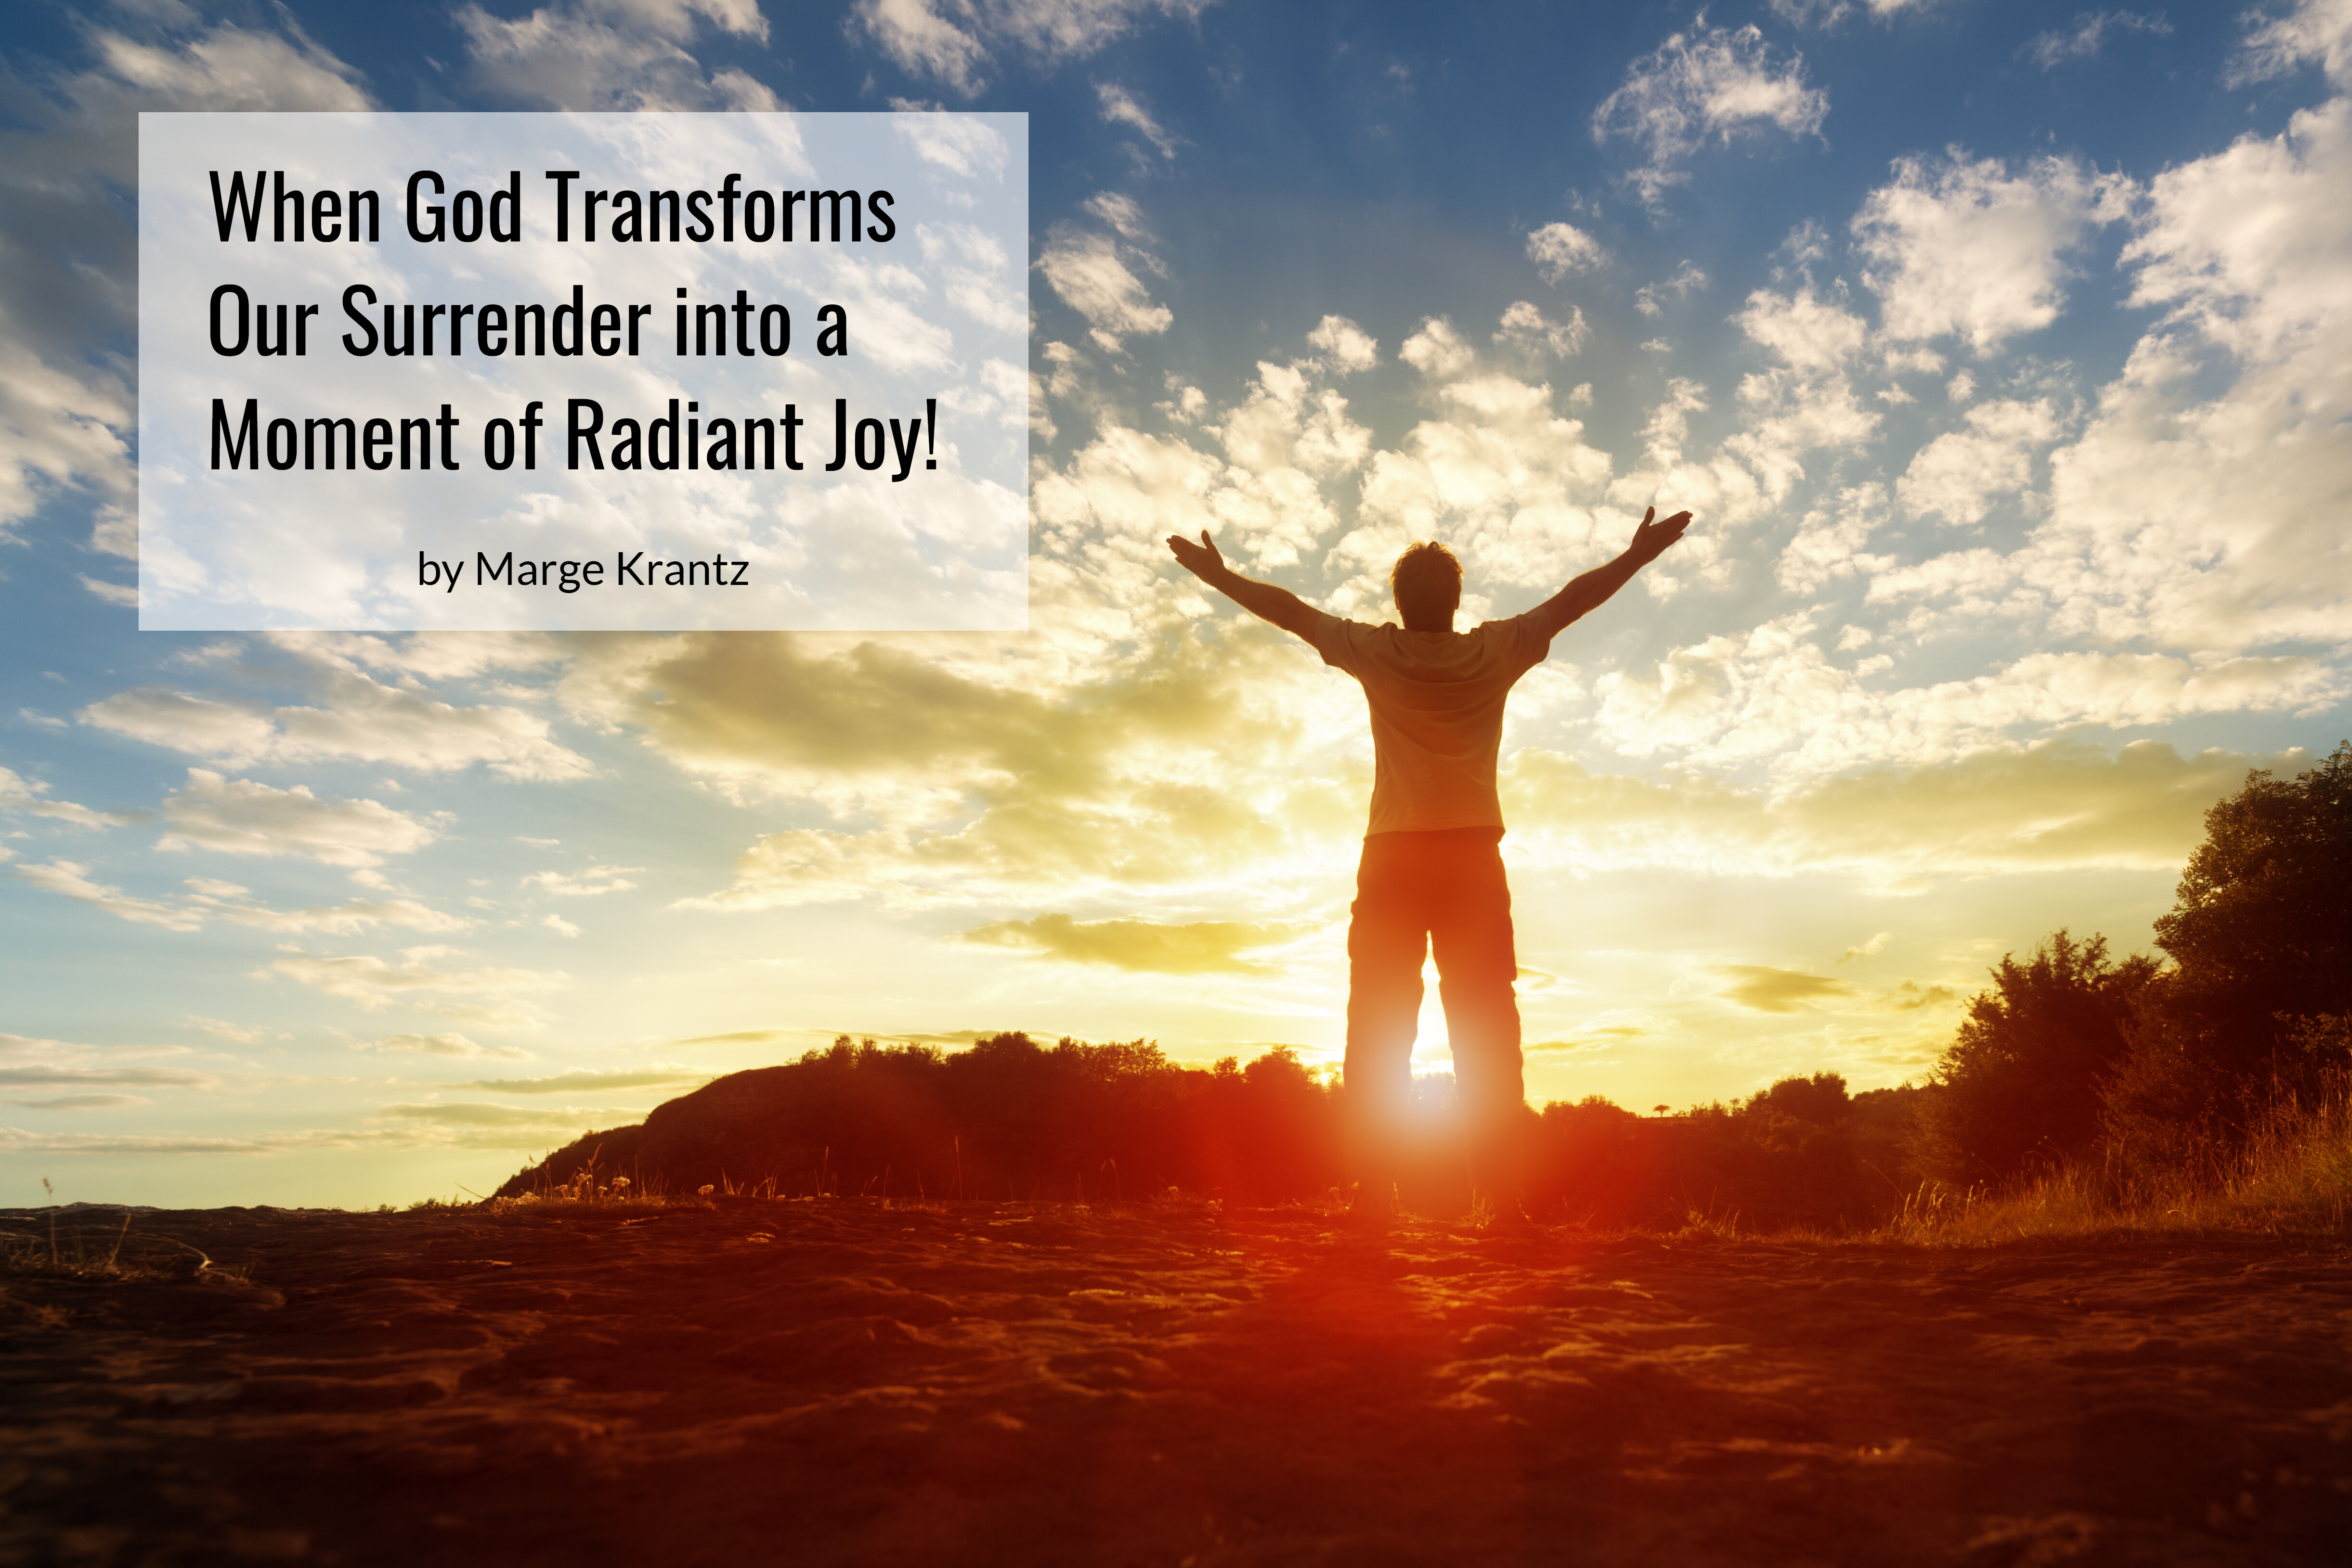 when-God-transforms-our-surrender-into-a-moment-of-radiant-joy